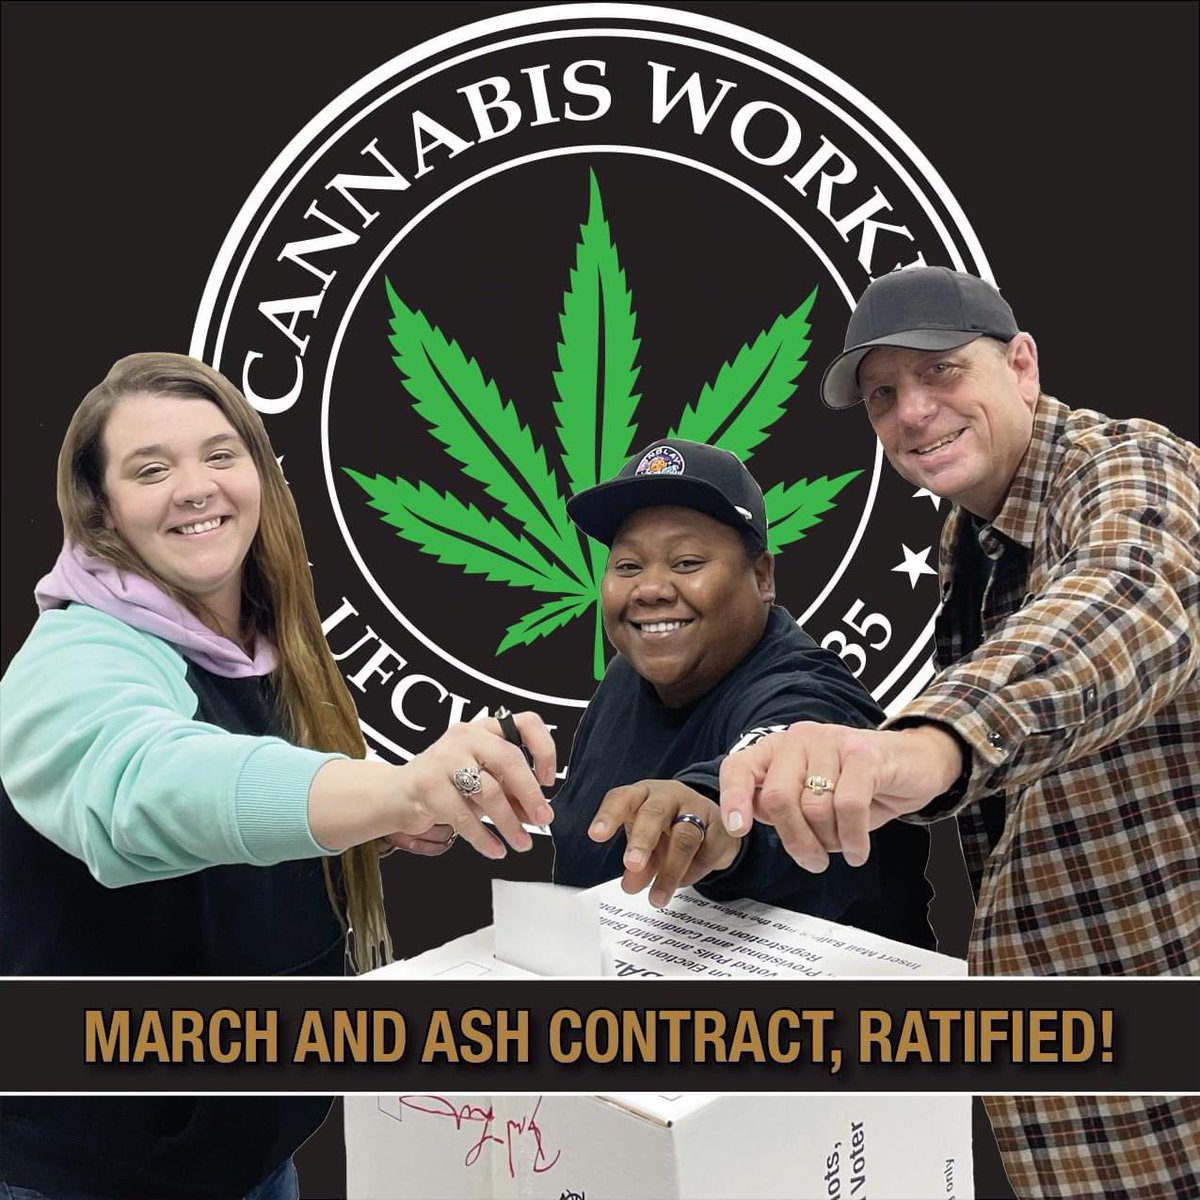 UFCW Local 135 members at San Diego's largest cannabis operator have ratified a new 3-year contract.
ufcw135.com/march-and-ash-…